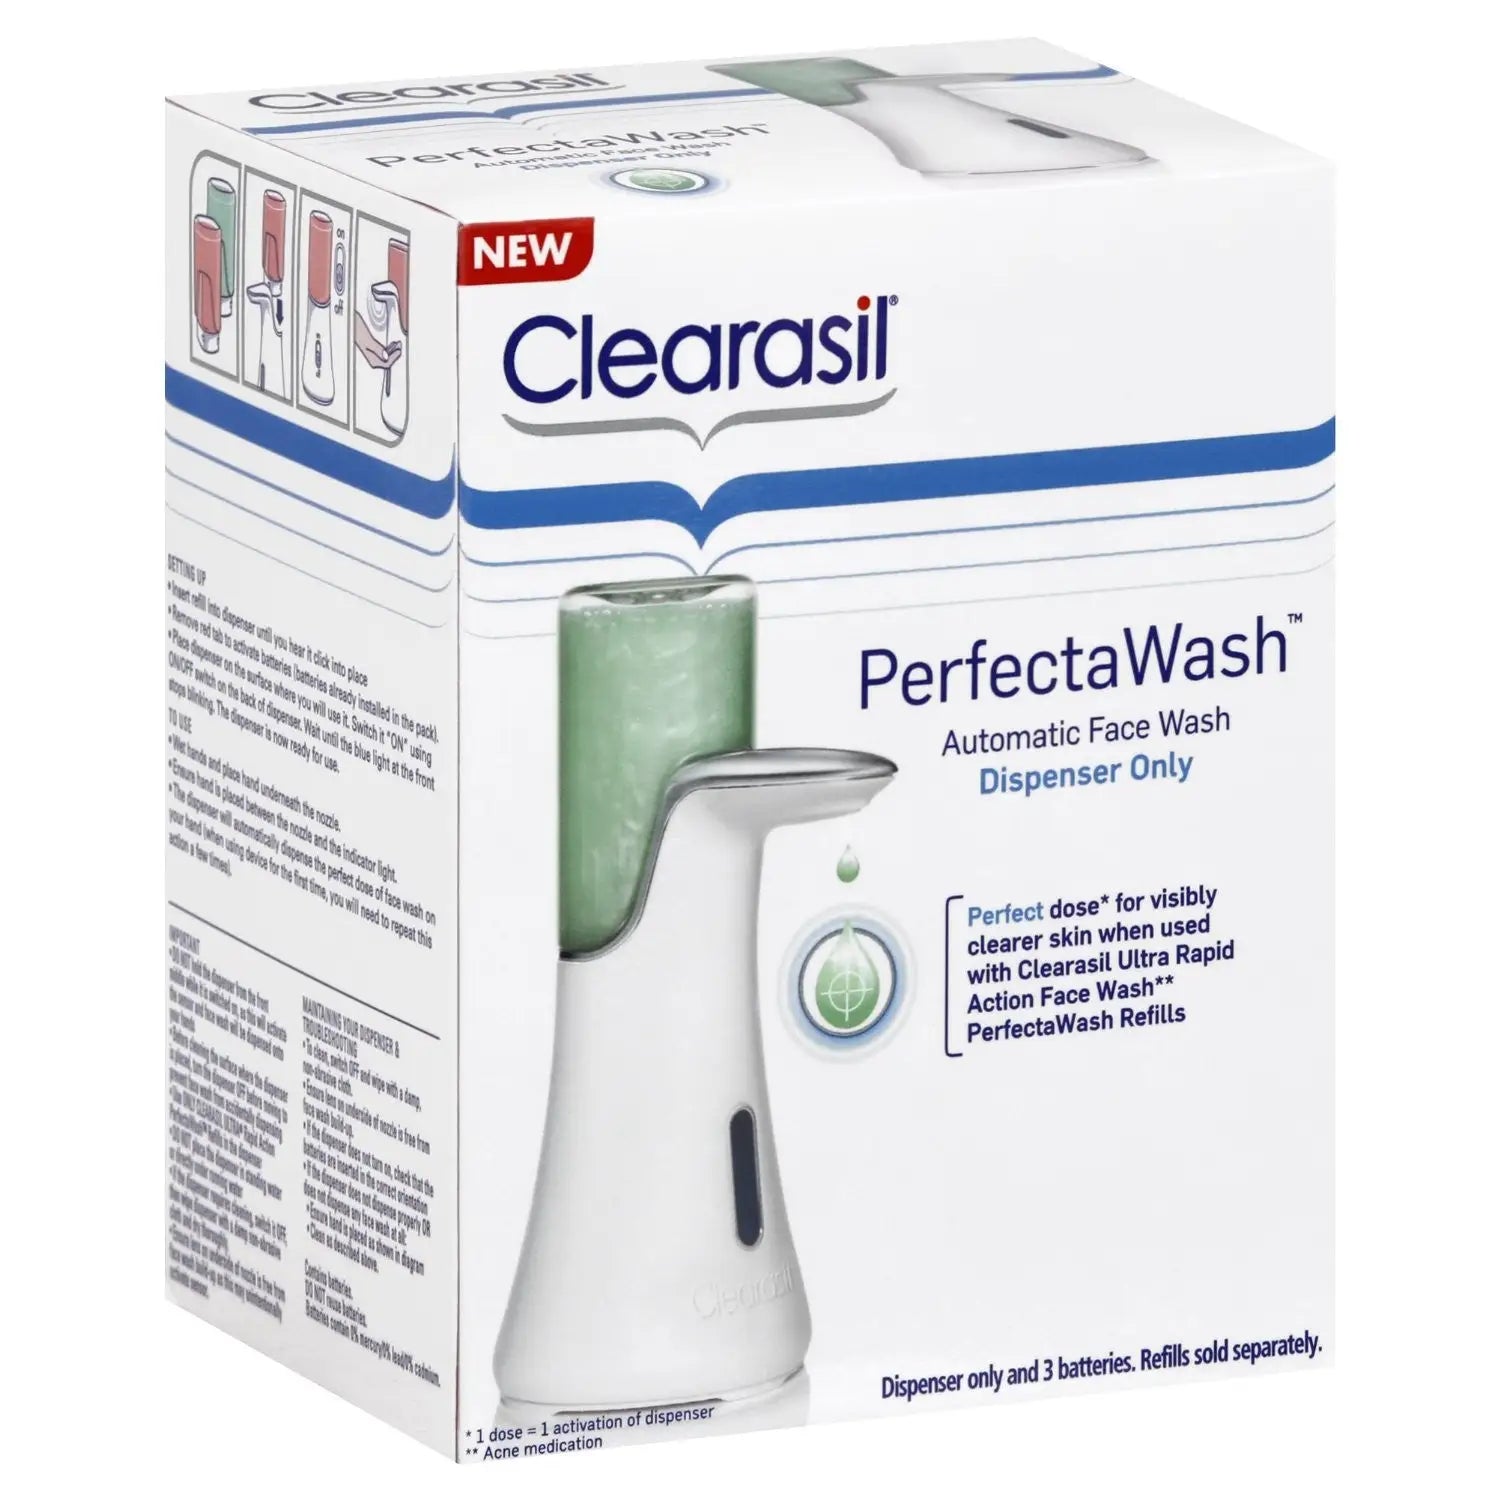 Clearasil PerfectaWash Automatic Face Wash Dispenser - Misc